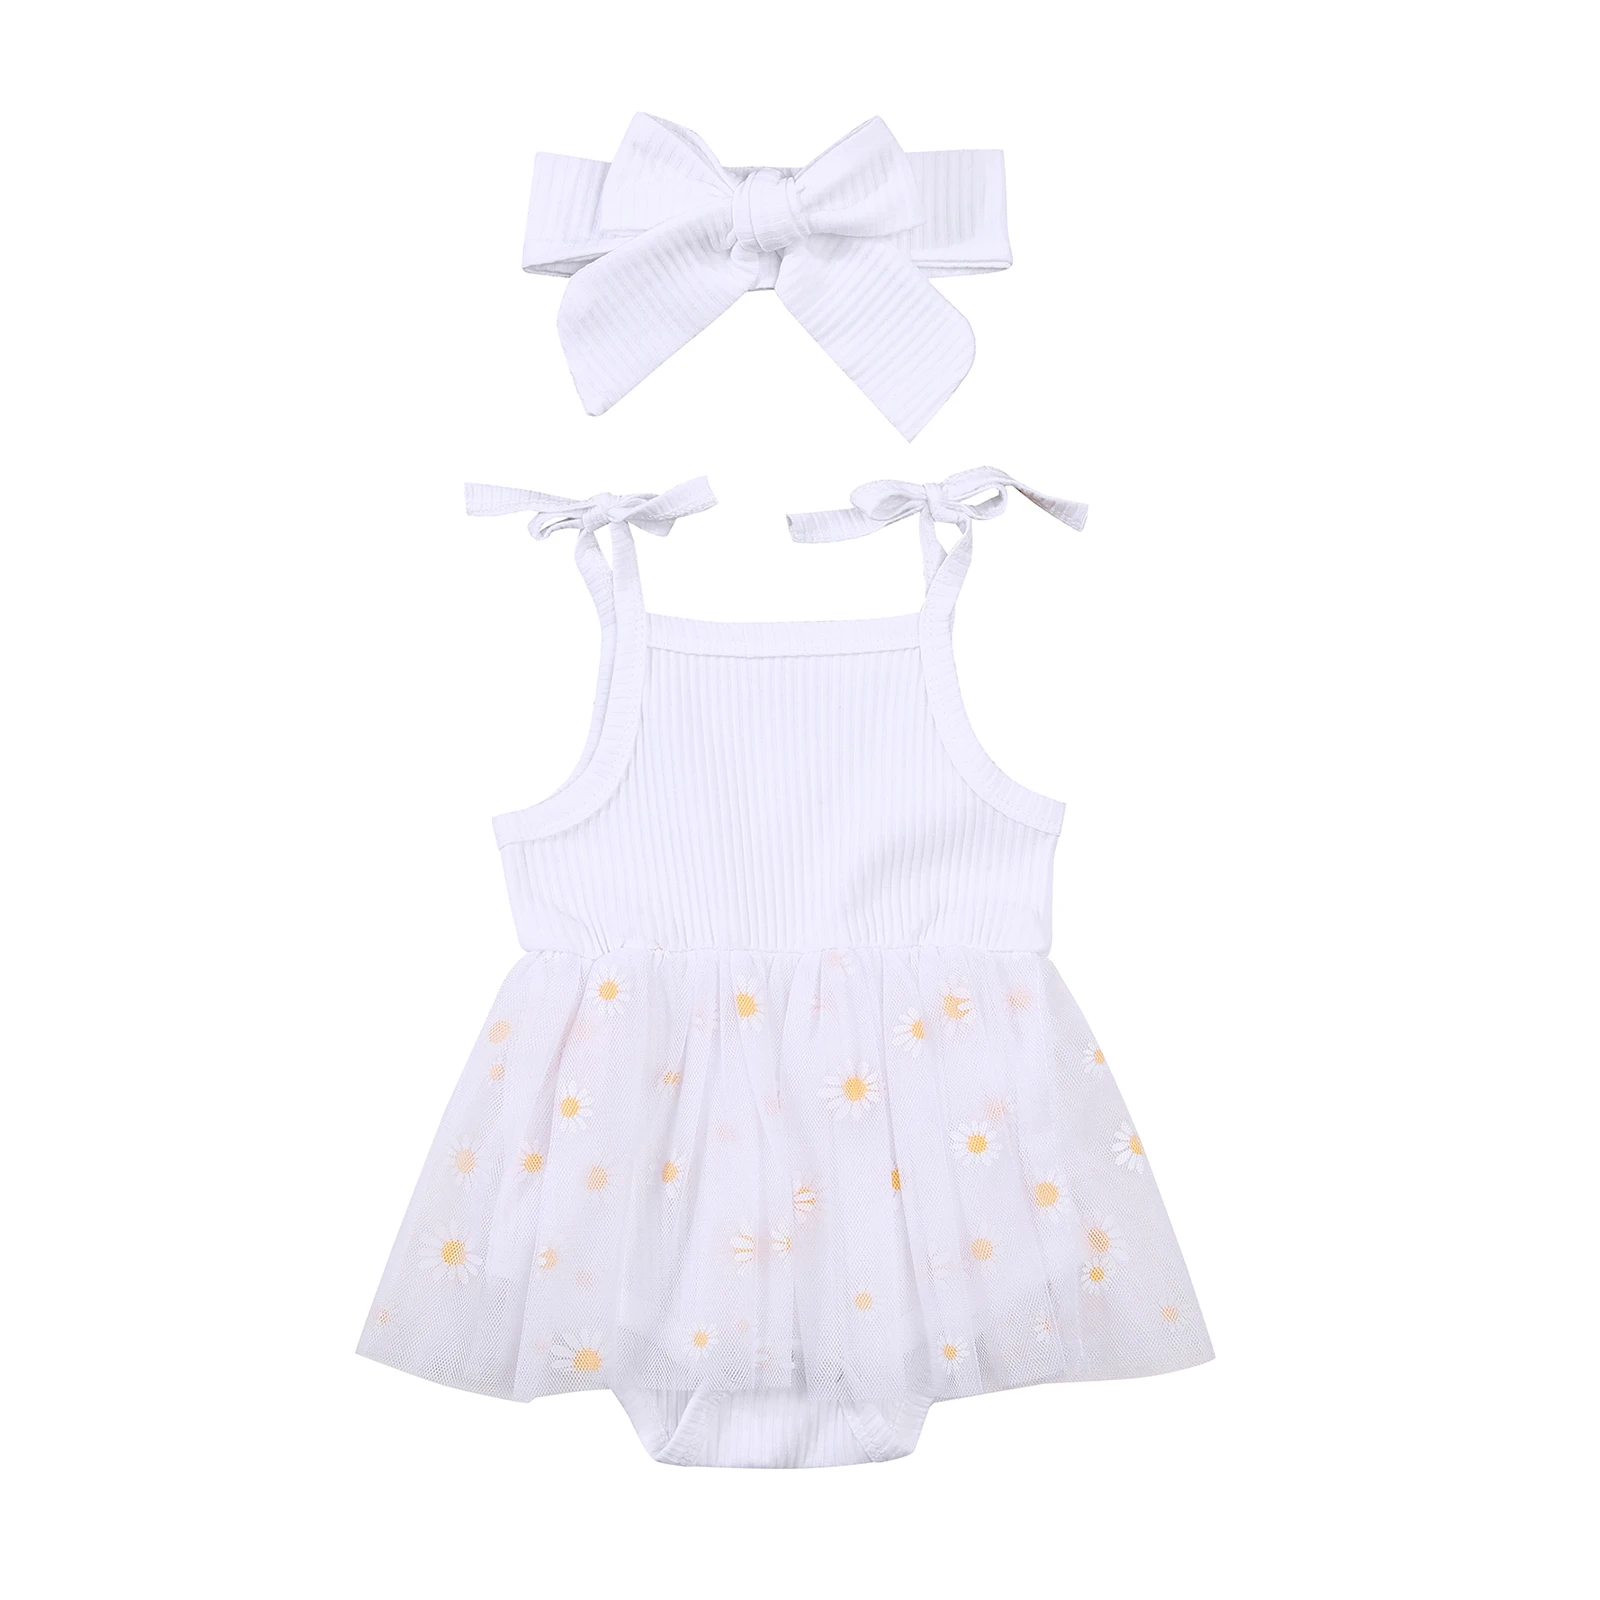 baby clothes cheap Fashion Newborn Baby Girls Ruffle Lace Floral Romper Jumpsuits Headband 2pcs Outfits Summer Set Baby Infant Clothes Baby Bodysuits Fur Baby Rompers